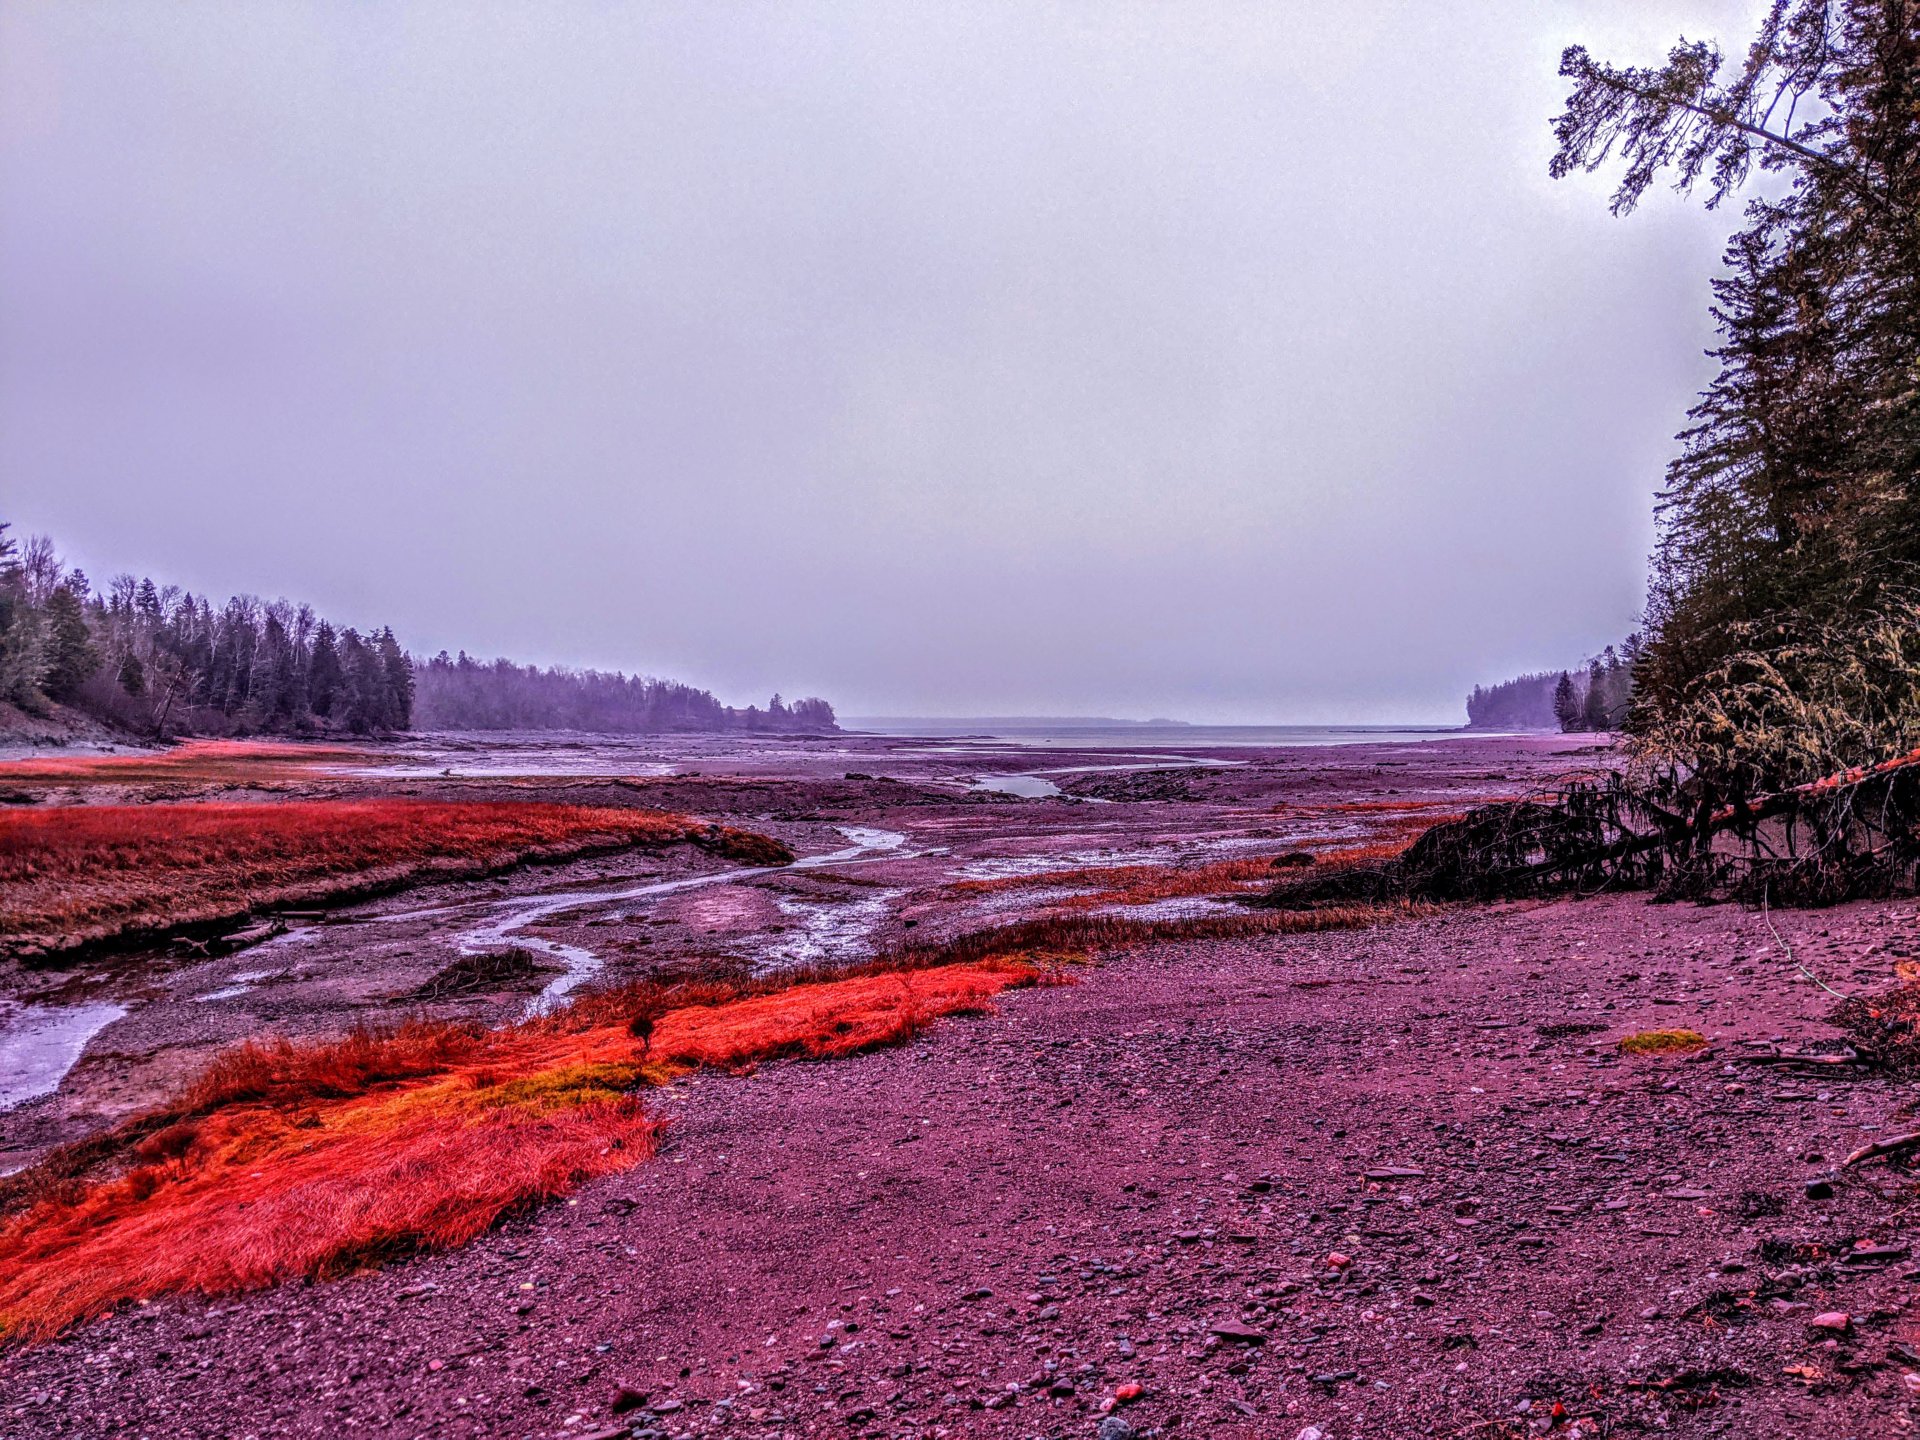 Nov 23, 2020 Lewis Cove Perry Maine red grass on the ocean bay low tide